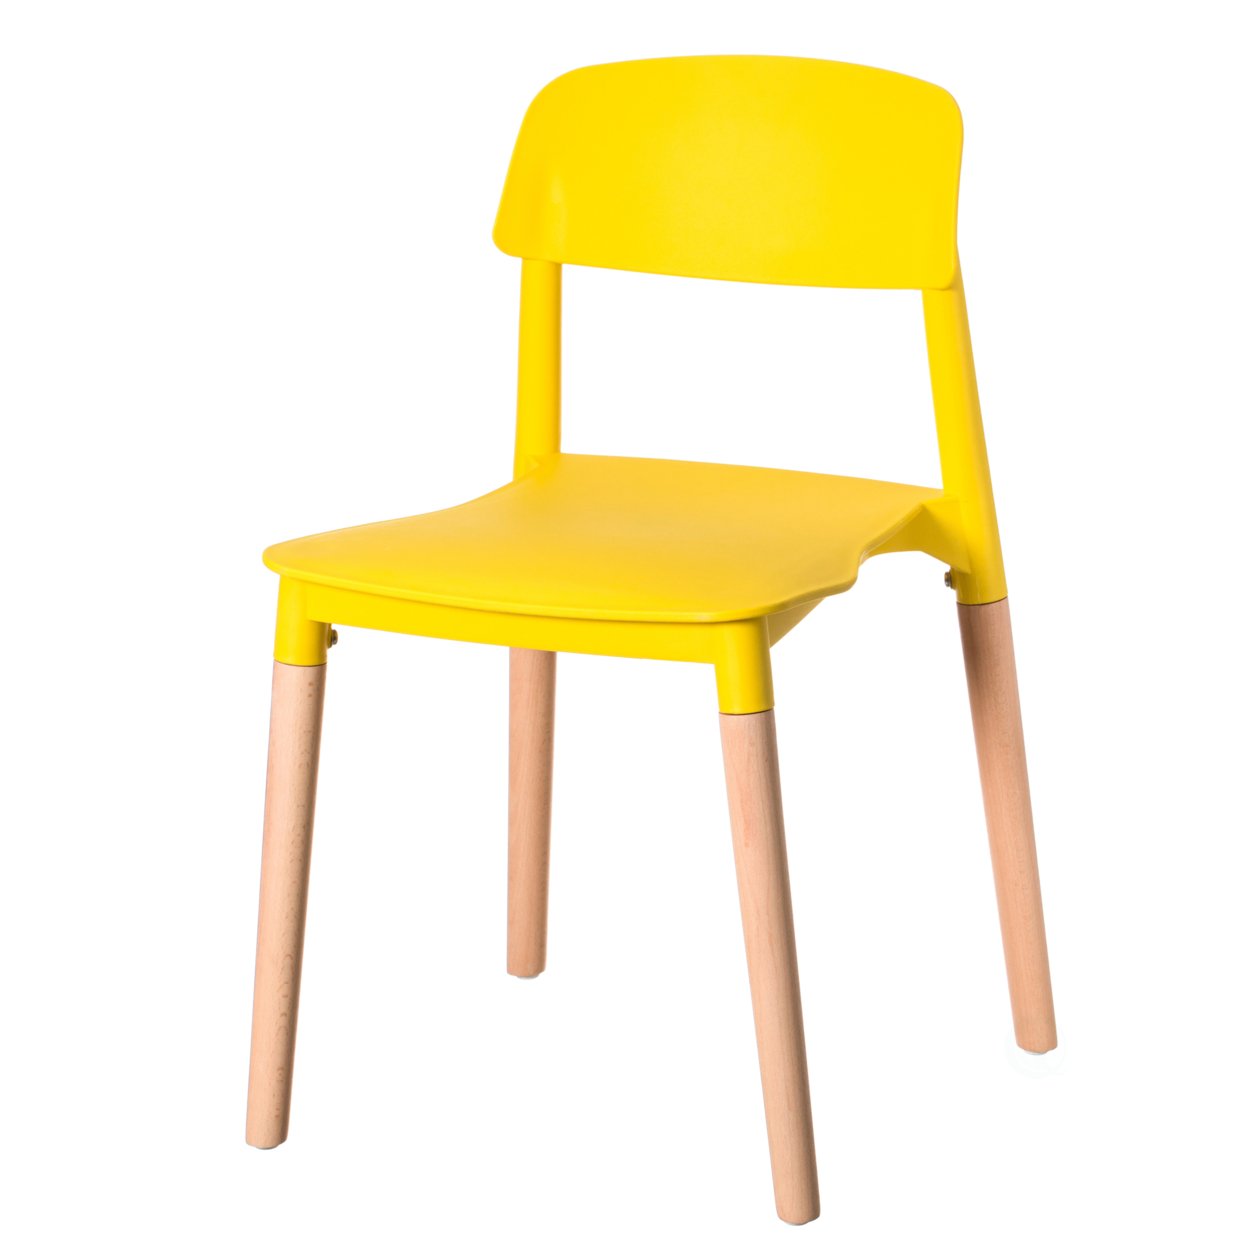 Modern Plastic Dining Chair Open Back With Beech Wood Legs - Single Yellow